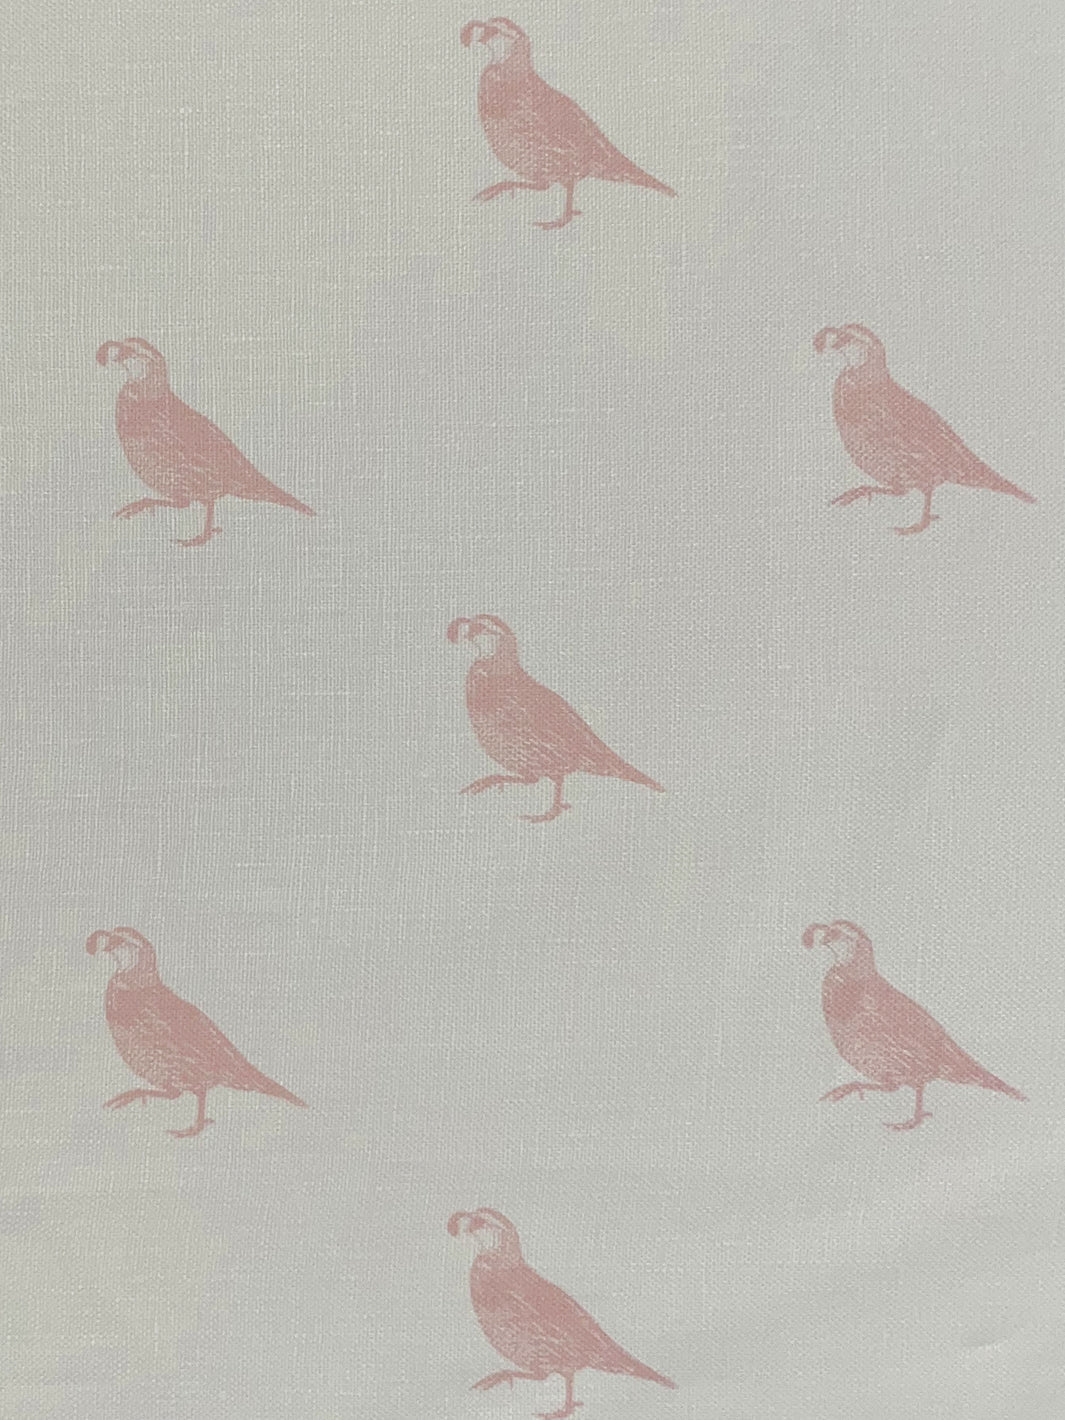 'California Quail' Linen Fabric by Nathan Turner - Pink